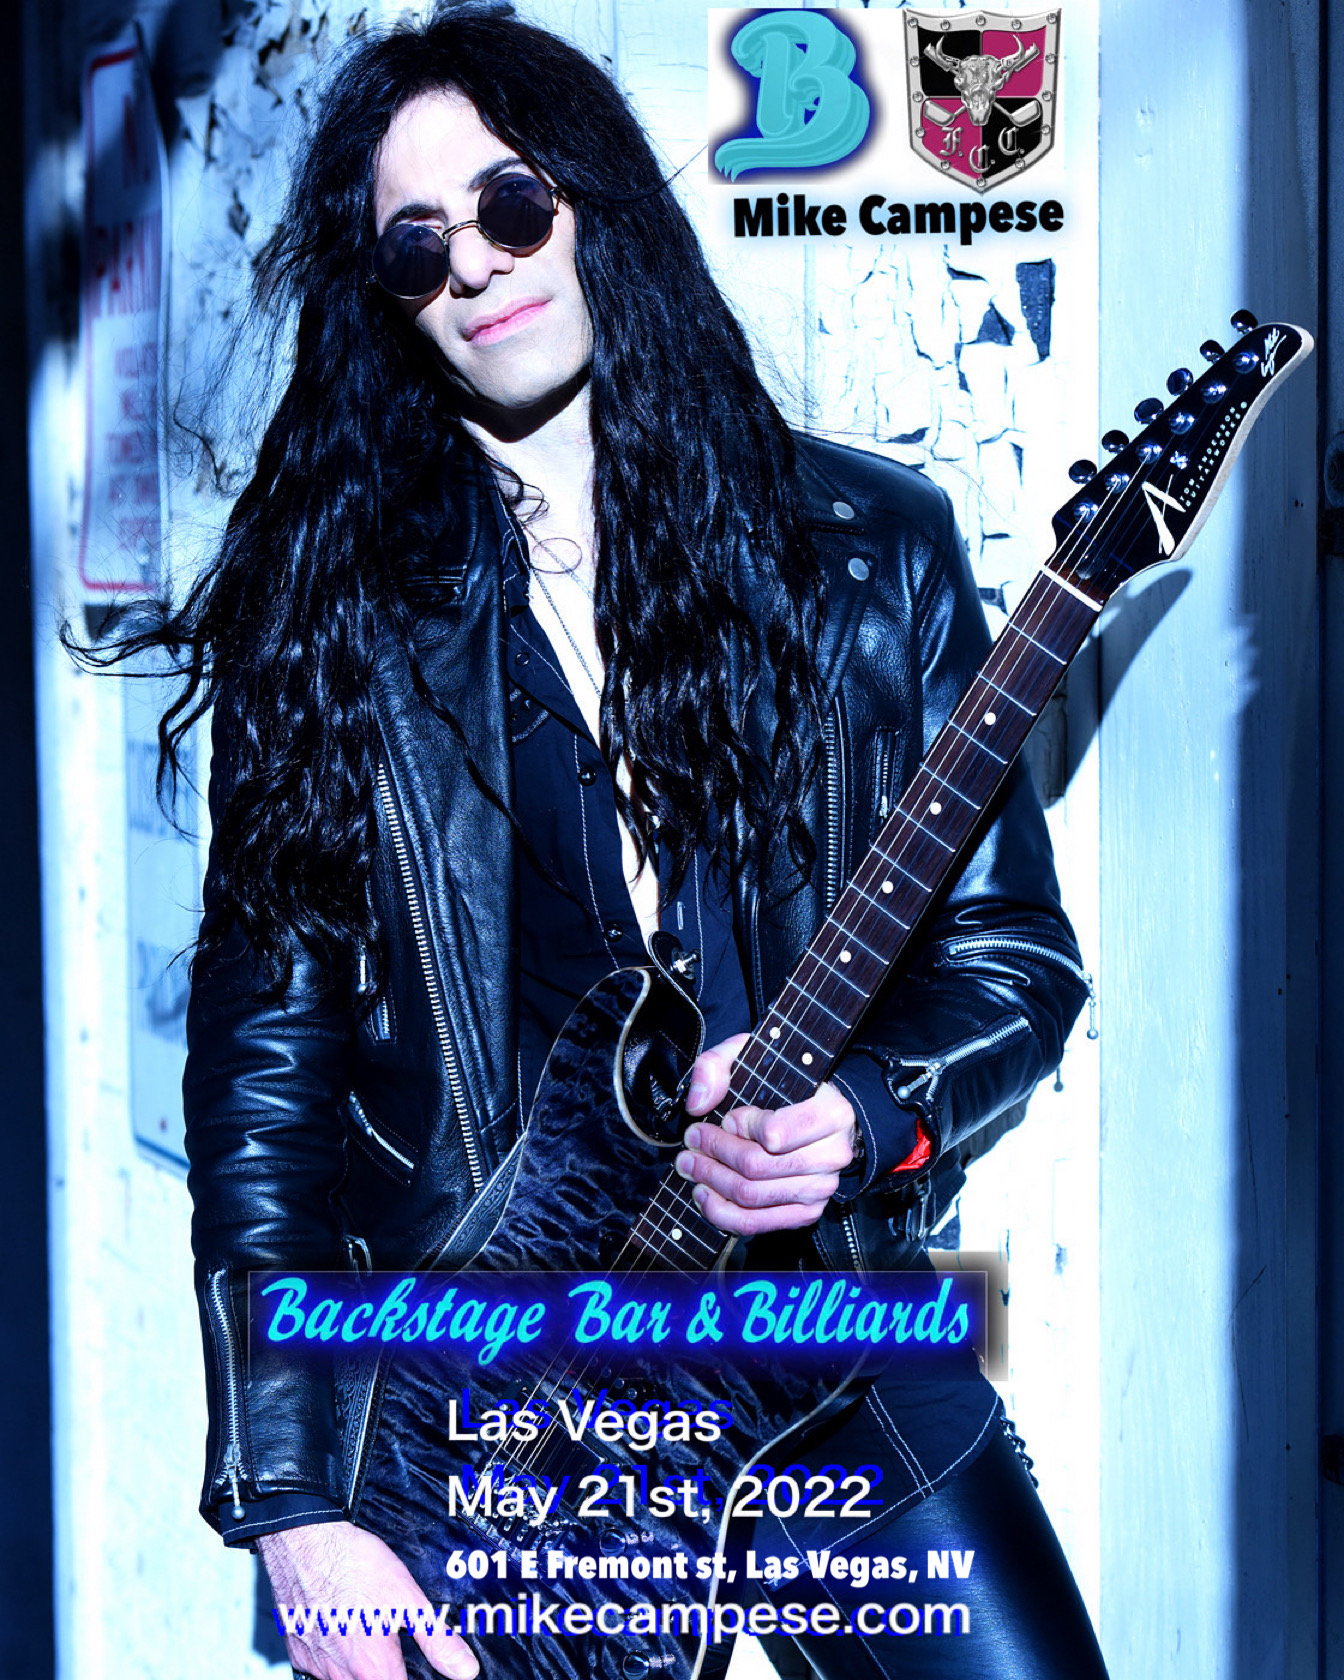 Backstage Bar and Billiards, Mike Campese May 21st, 2022.